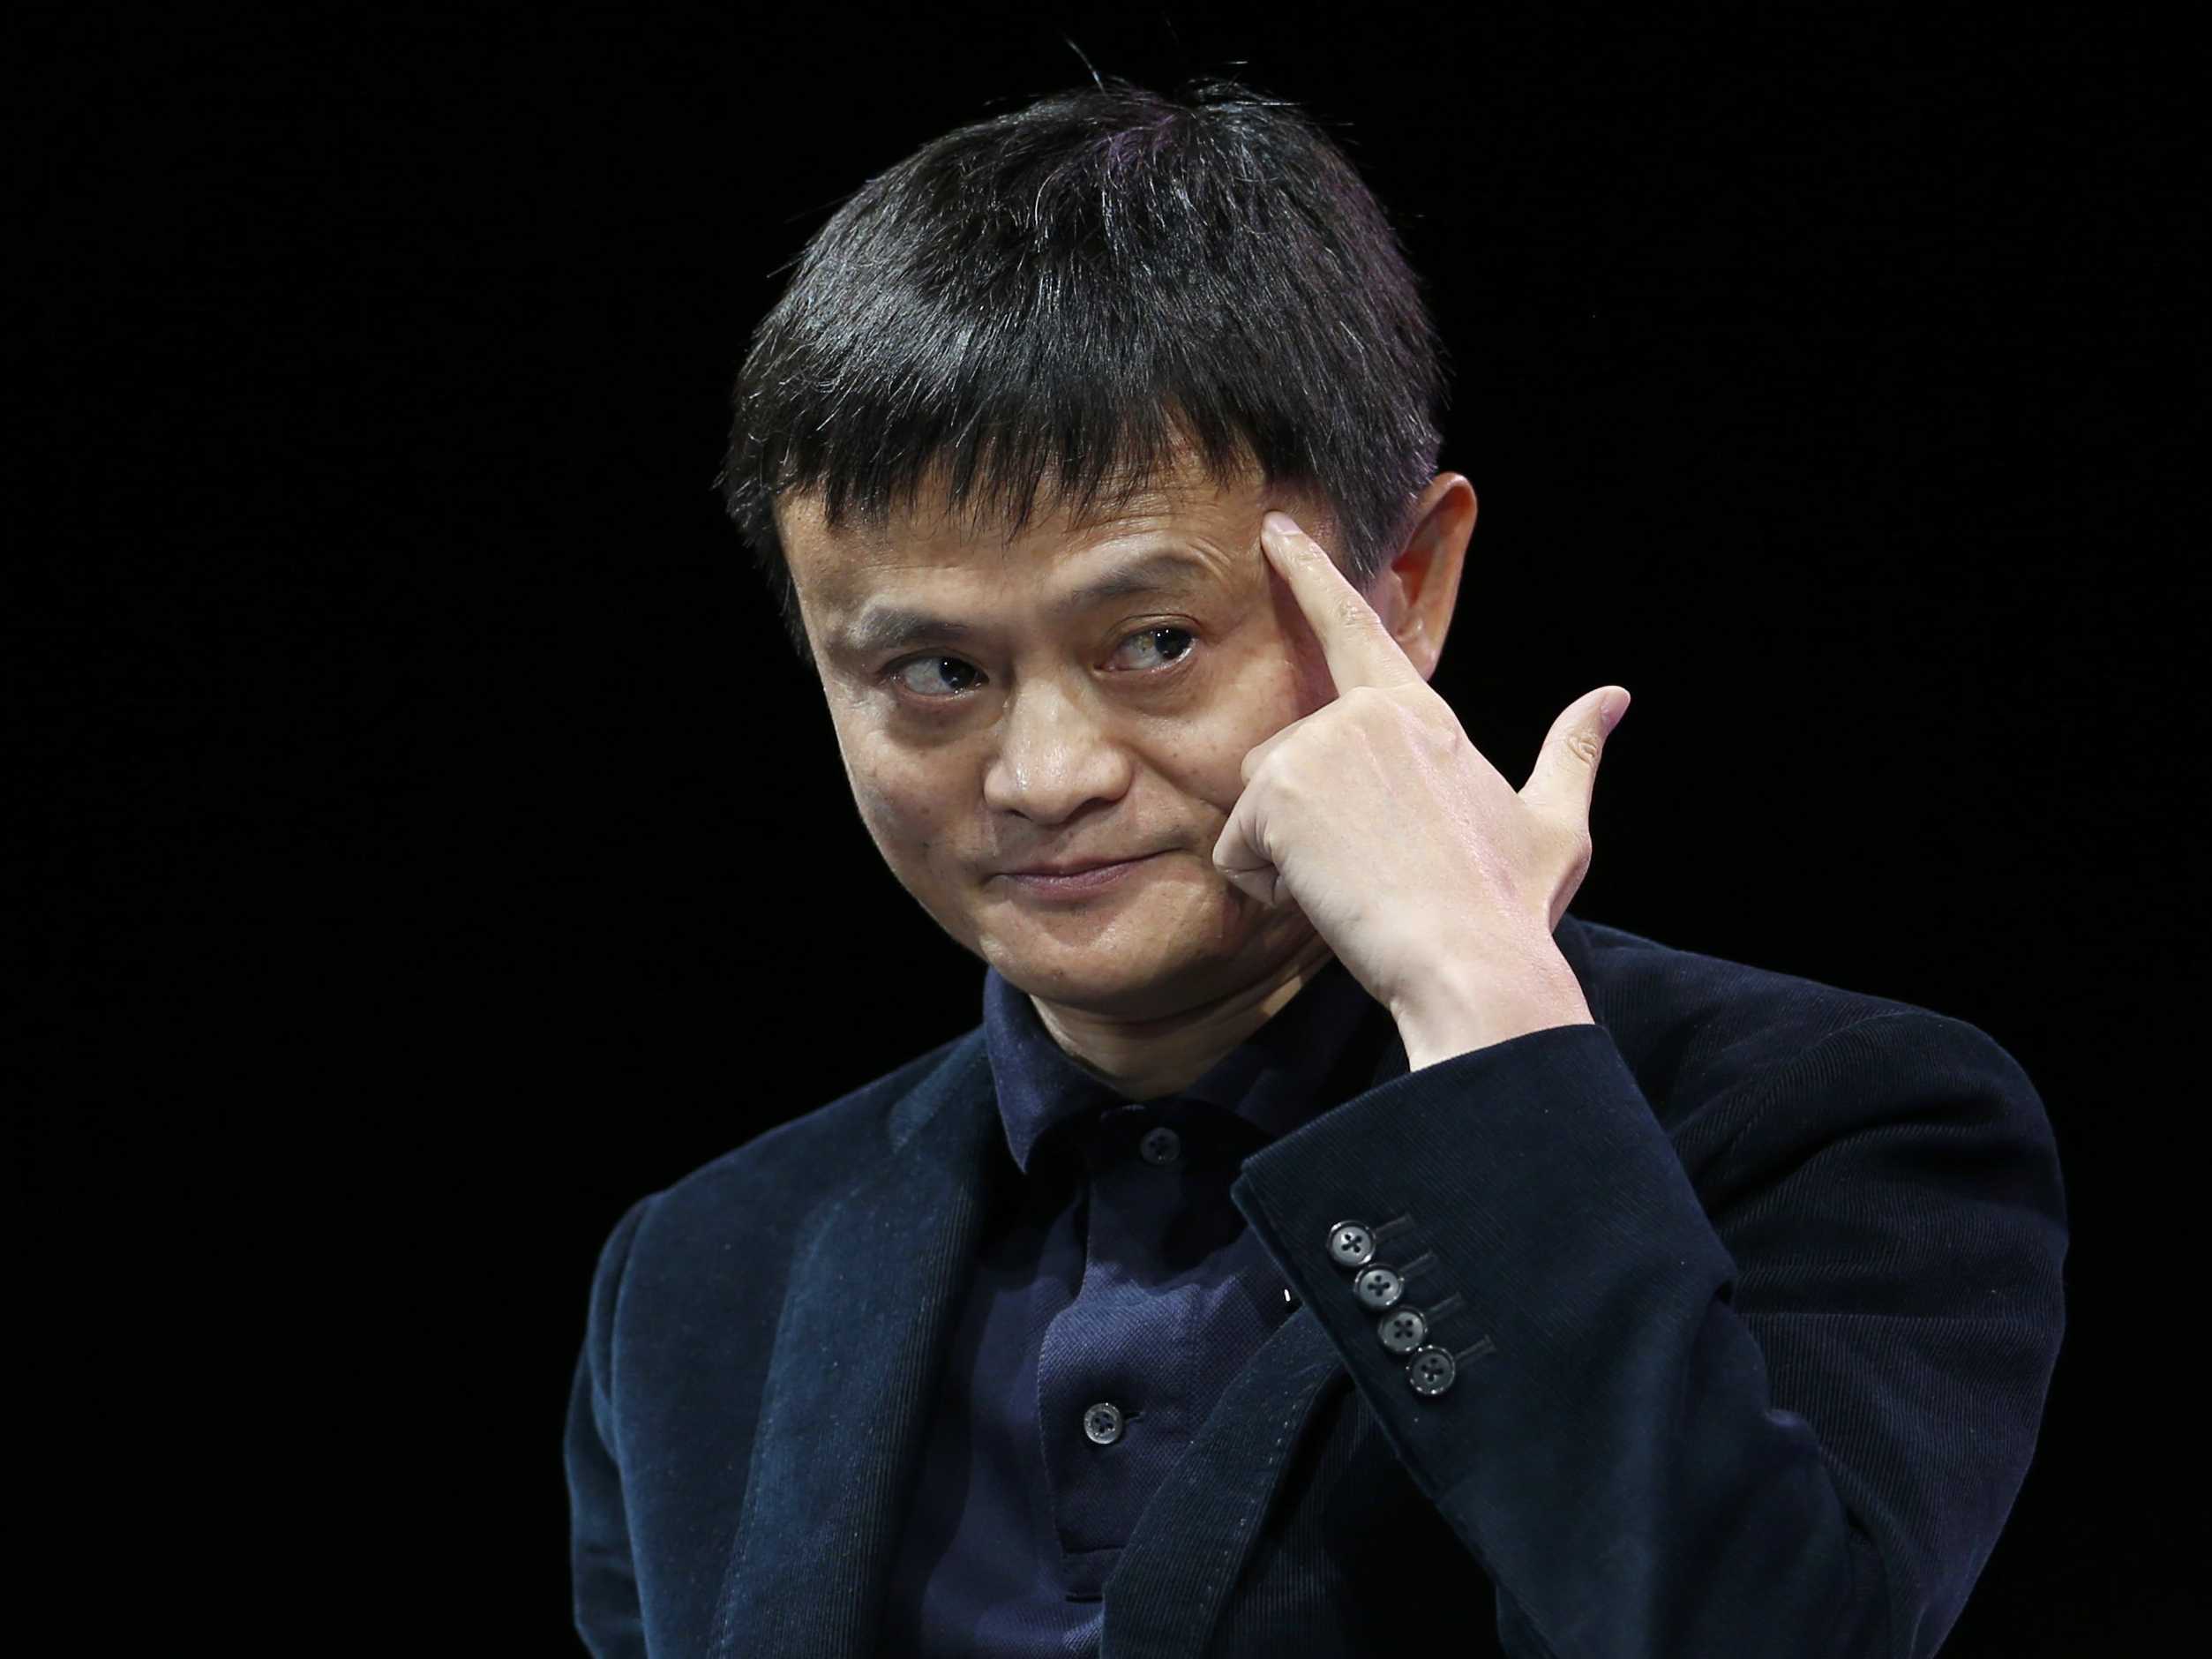 WANT TO WORK FOR JACK MA? THESE ARE THE TRAITS HE LOOKS FOR IN A CANDIDATE